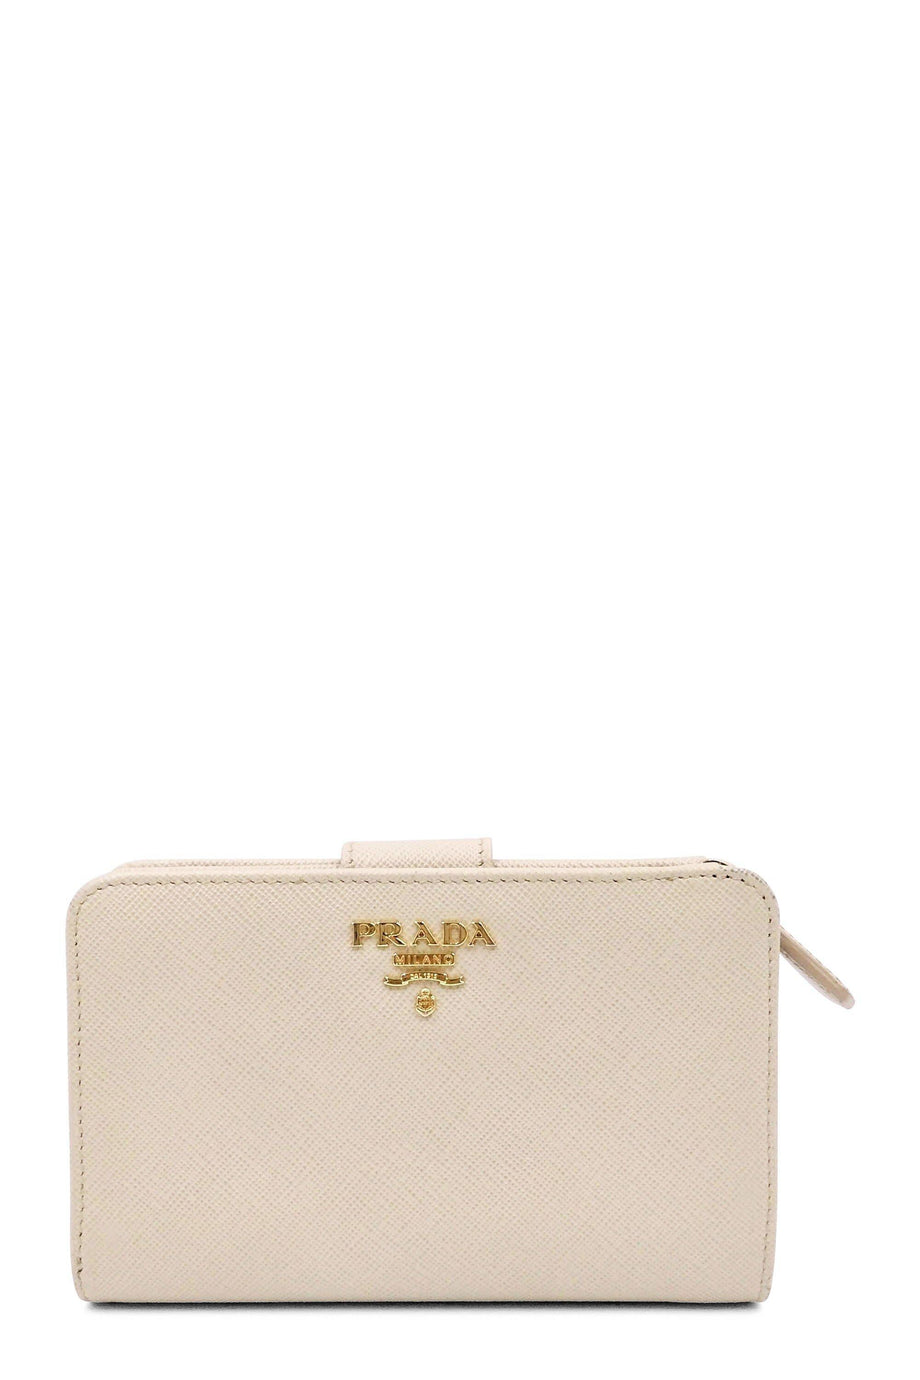 Prada Preloved Saffiano Leather French Wallet